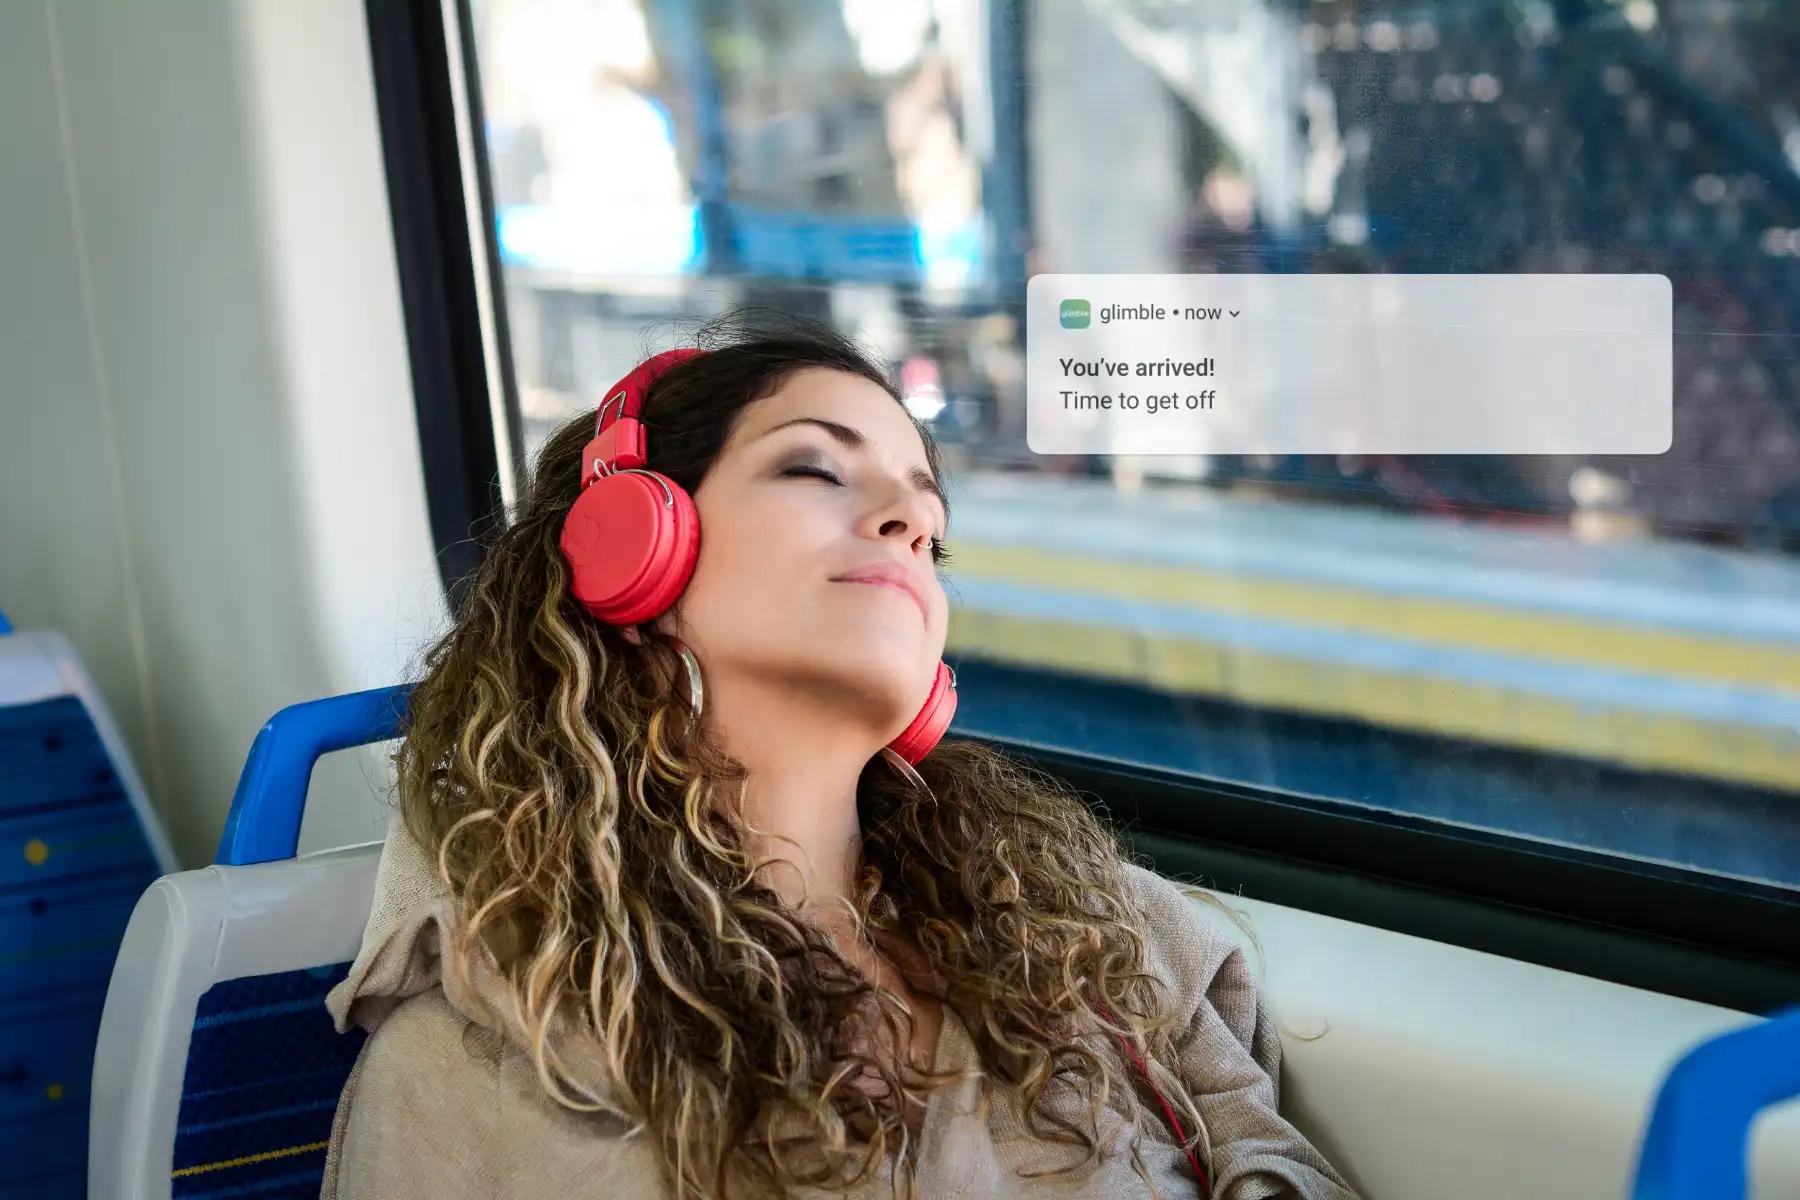 The glimble travel assistant navigates you through the city during your tram journey. 